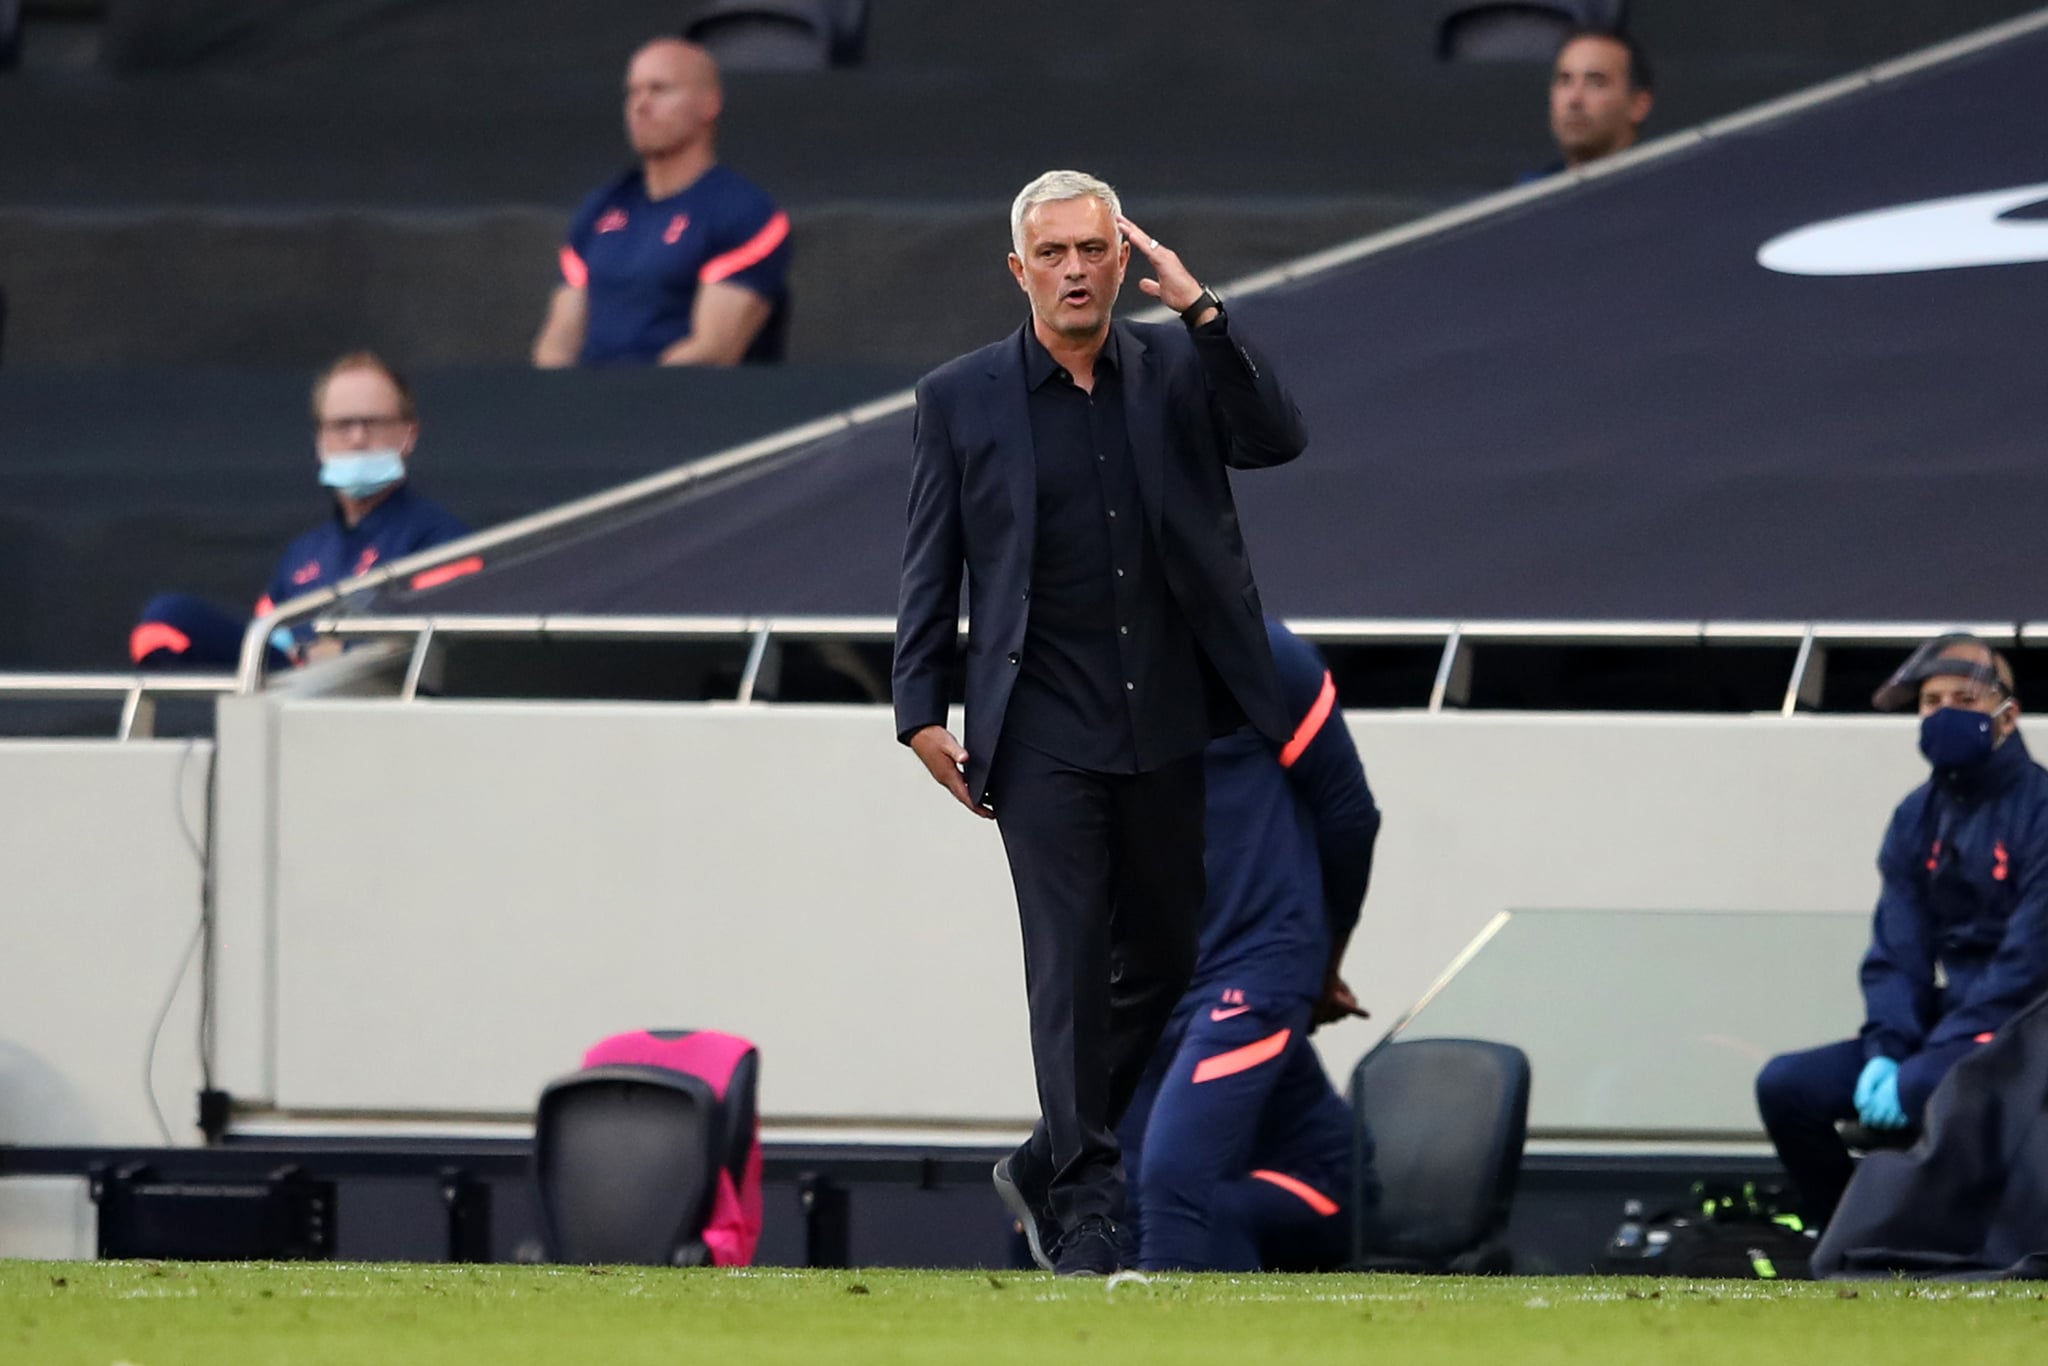 LONDON, ENGLAND - SEPTEMBER 13: Jose Mourinho, Manager of Tottenham Hotspur reacts during the Premier League match between Tottenham Hotspur and Everton at Tottenham Hotspur Stadium on September 13, 2020 in London, England. (Photo by Alex Pantling/Getty Images)